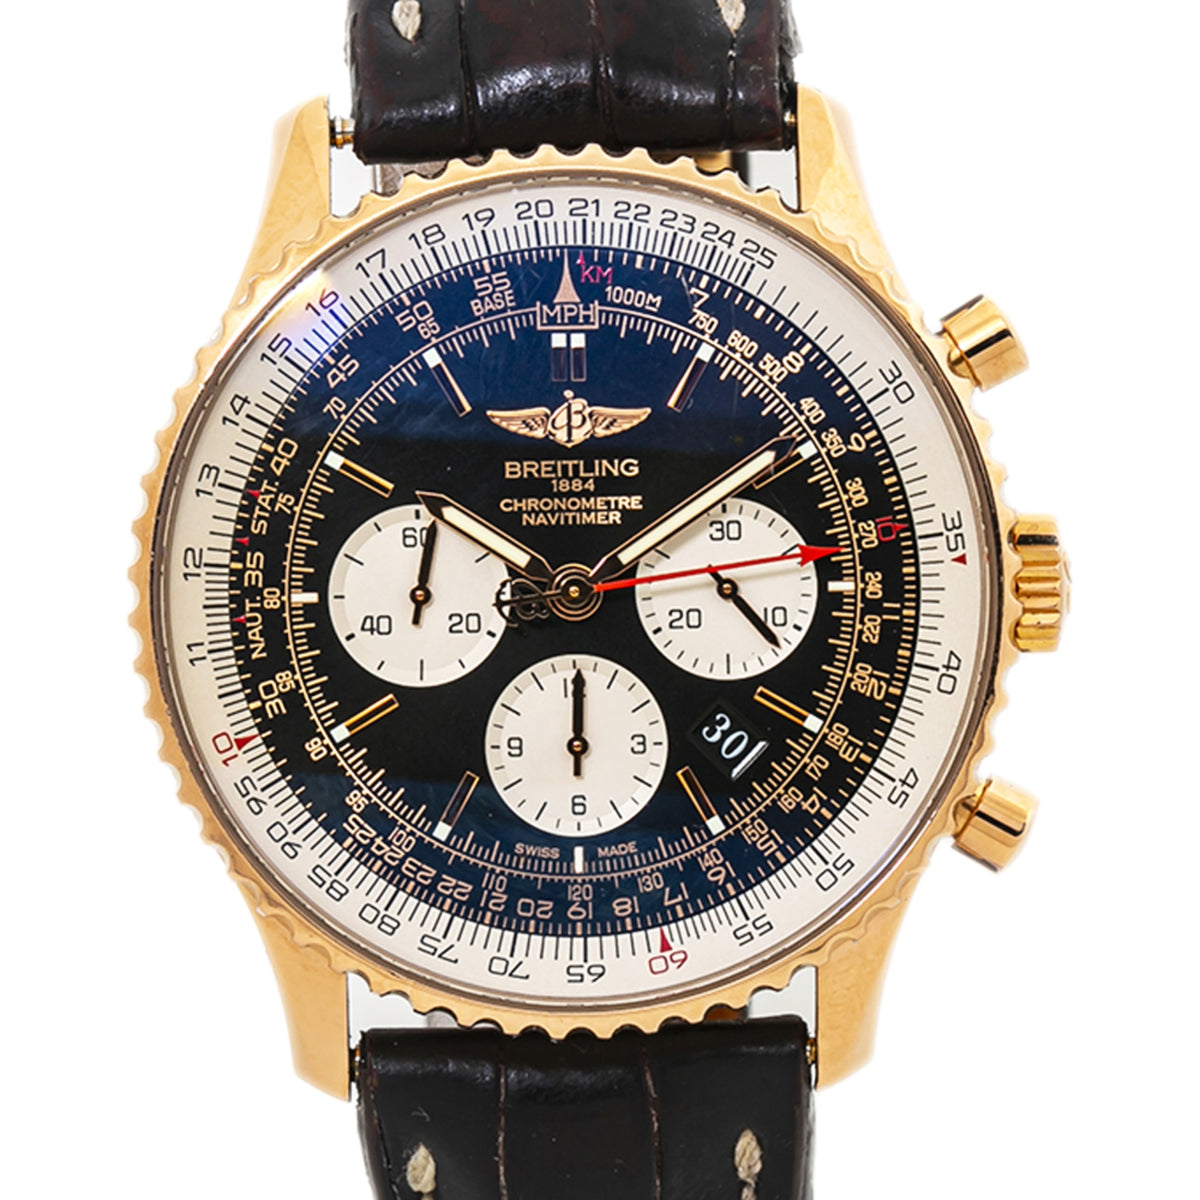 Breitling Navitimer RB0127 Limited 18k Rose Automatic Watch GMT Chronograph 46mm